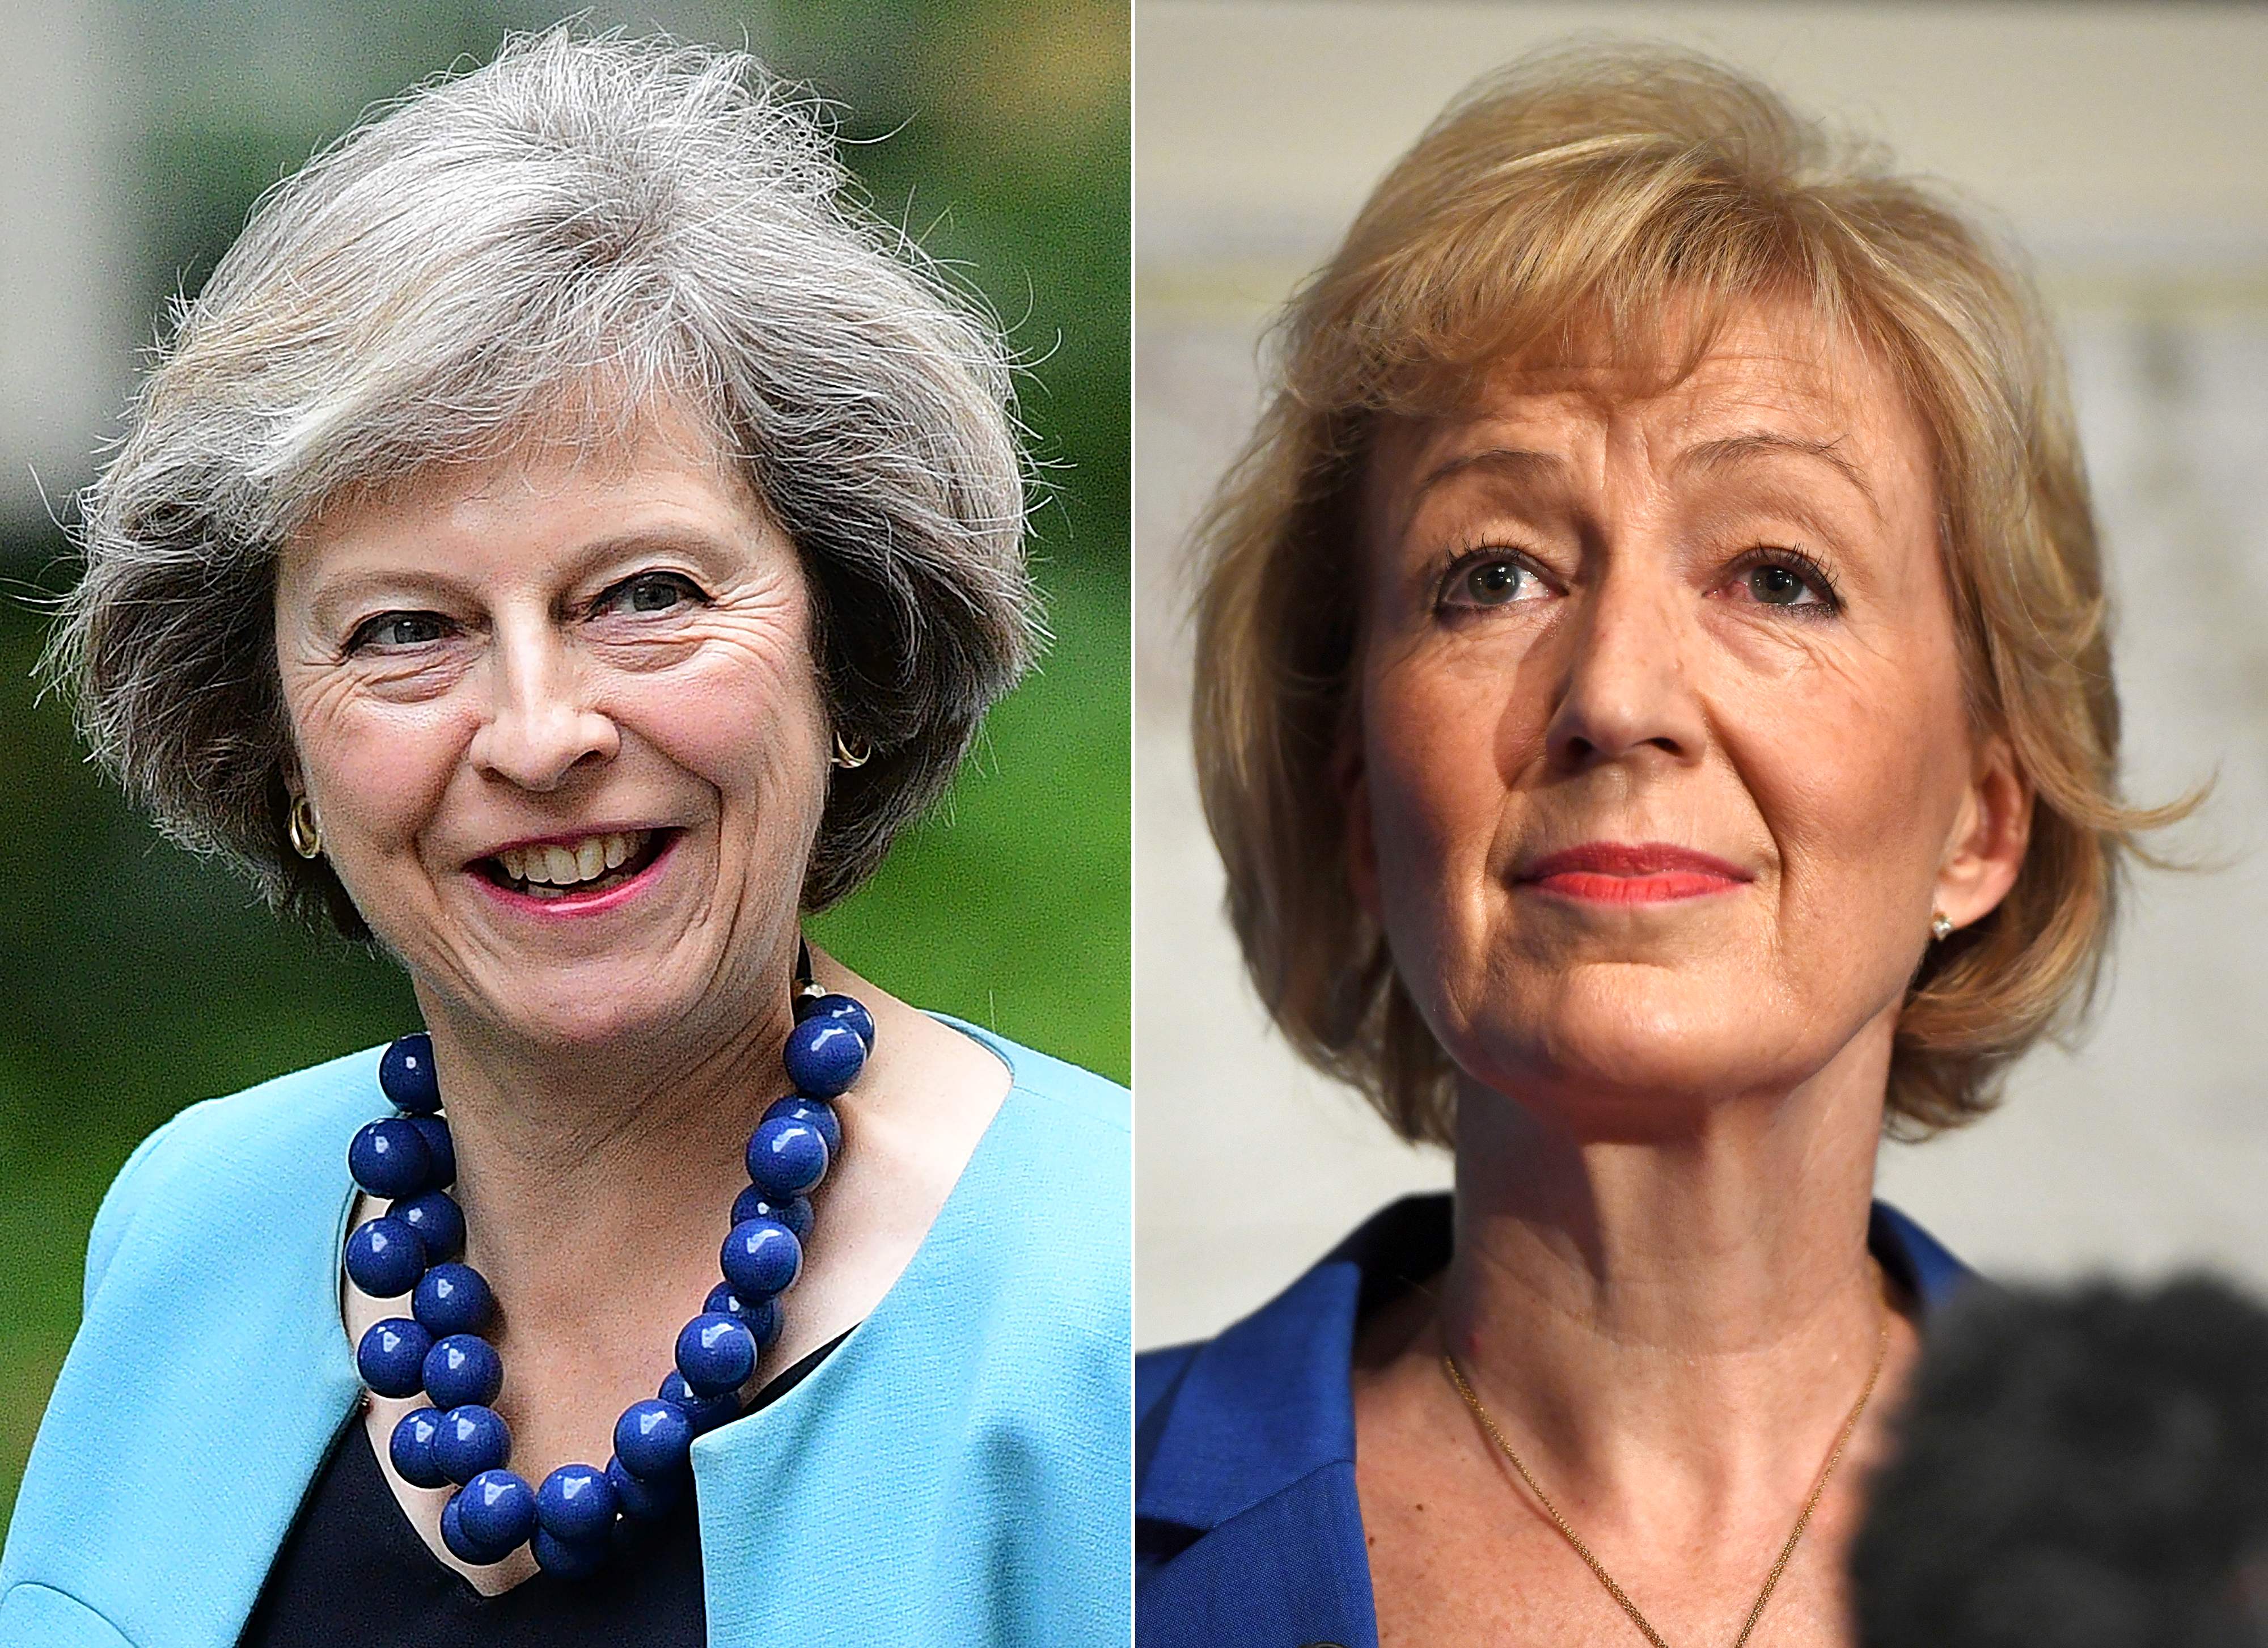 Britain's May and Leadsom in all-women race for PM - Times of Oman